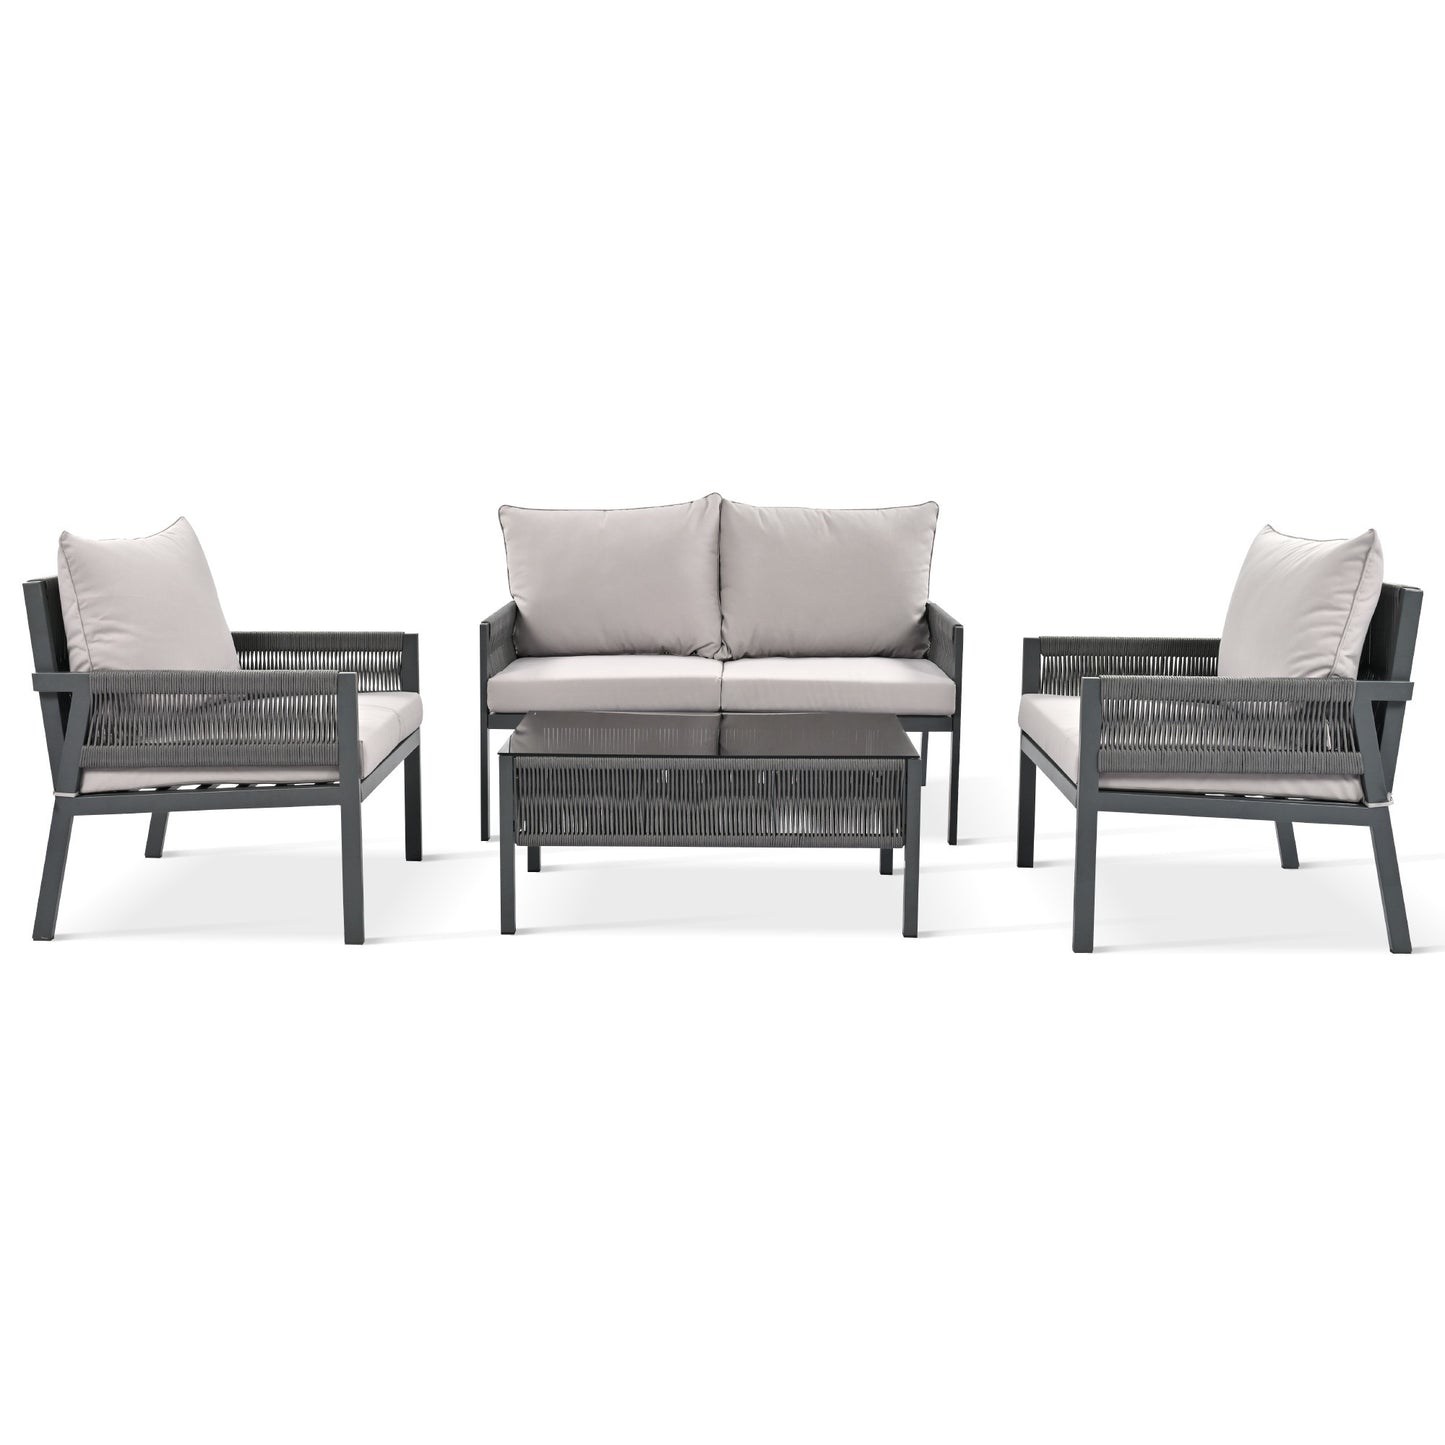 4-Piece Rope Patio Furniture Set with Thick Cushions